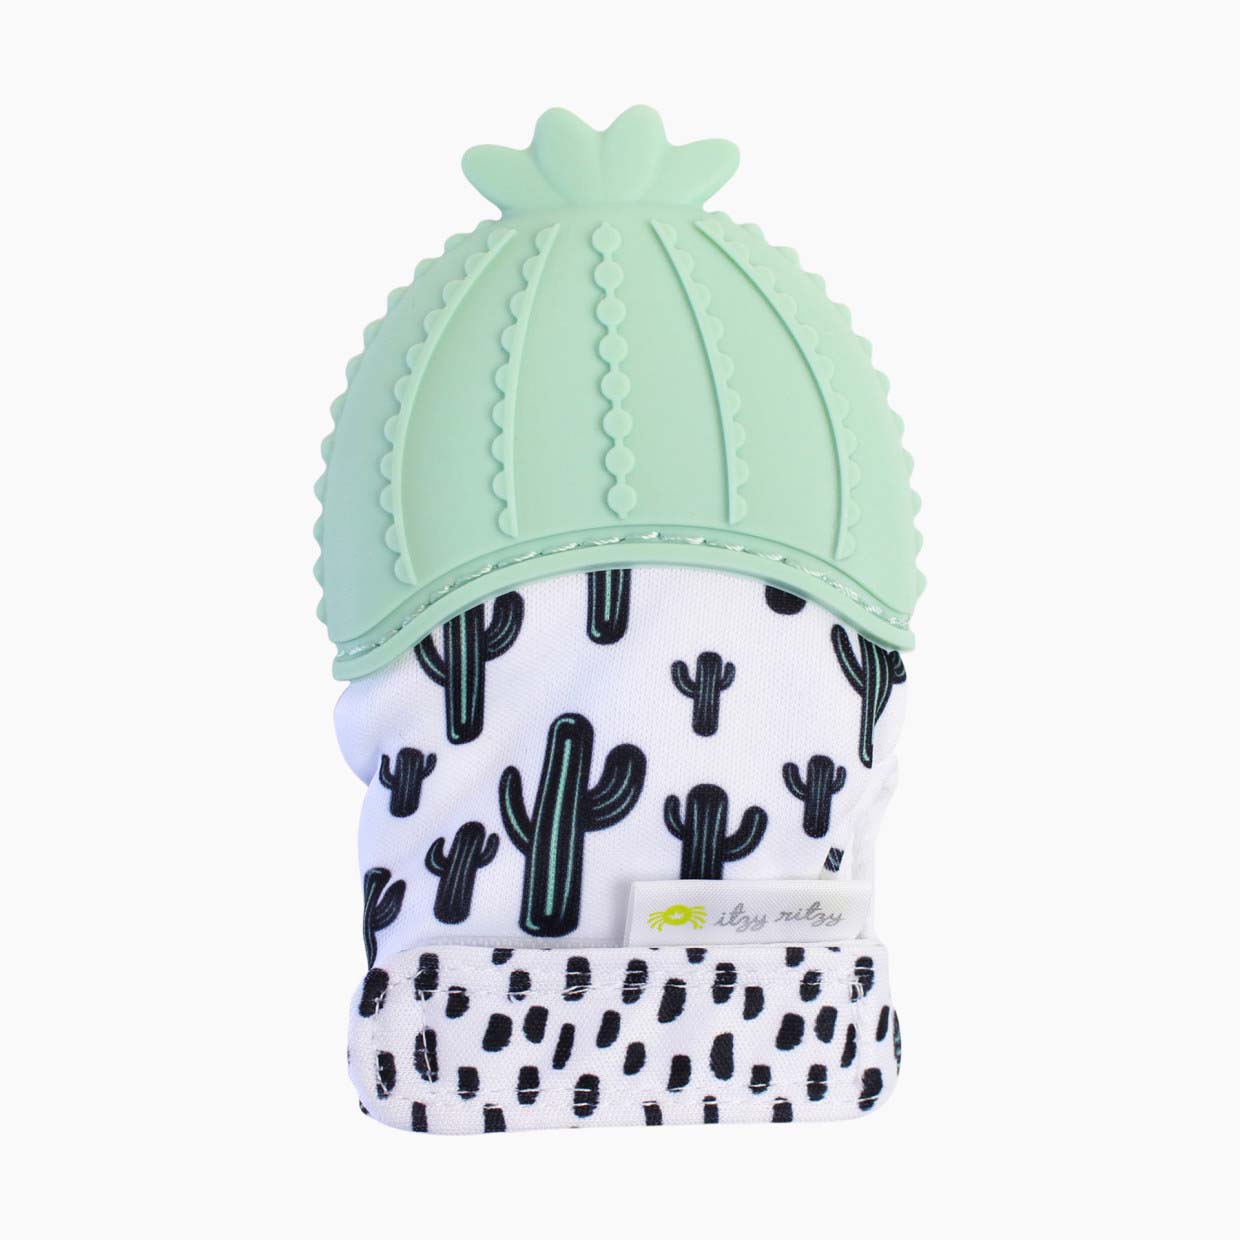 Itzy Ritzy Teething Mitt with light green silicone top and black and white cactus pattern